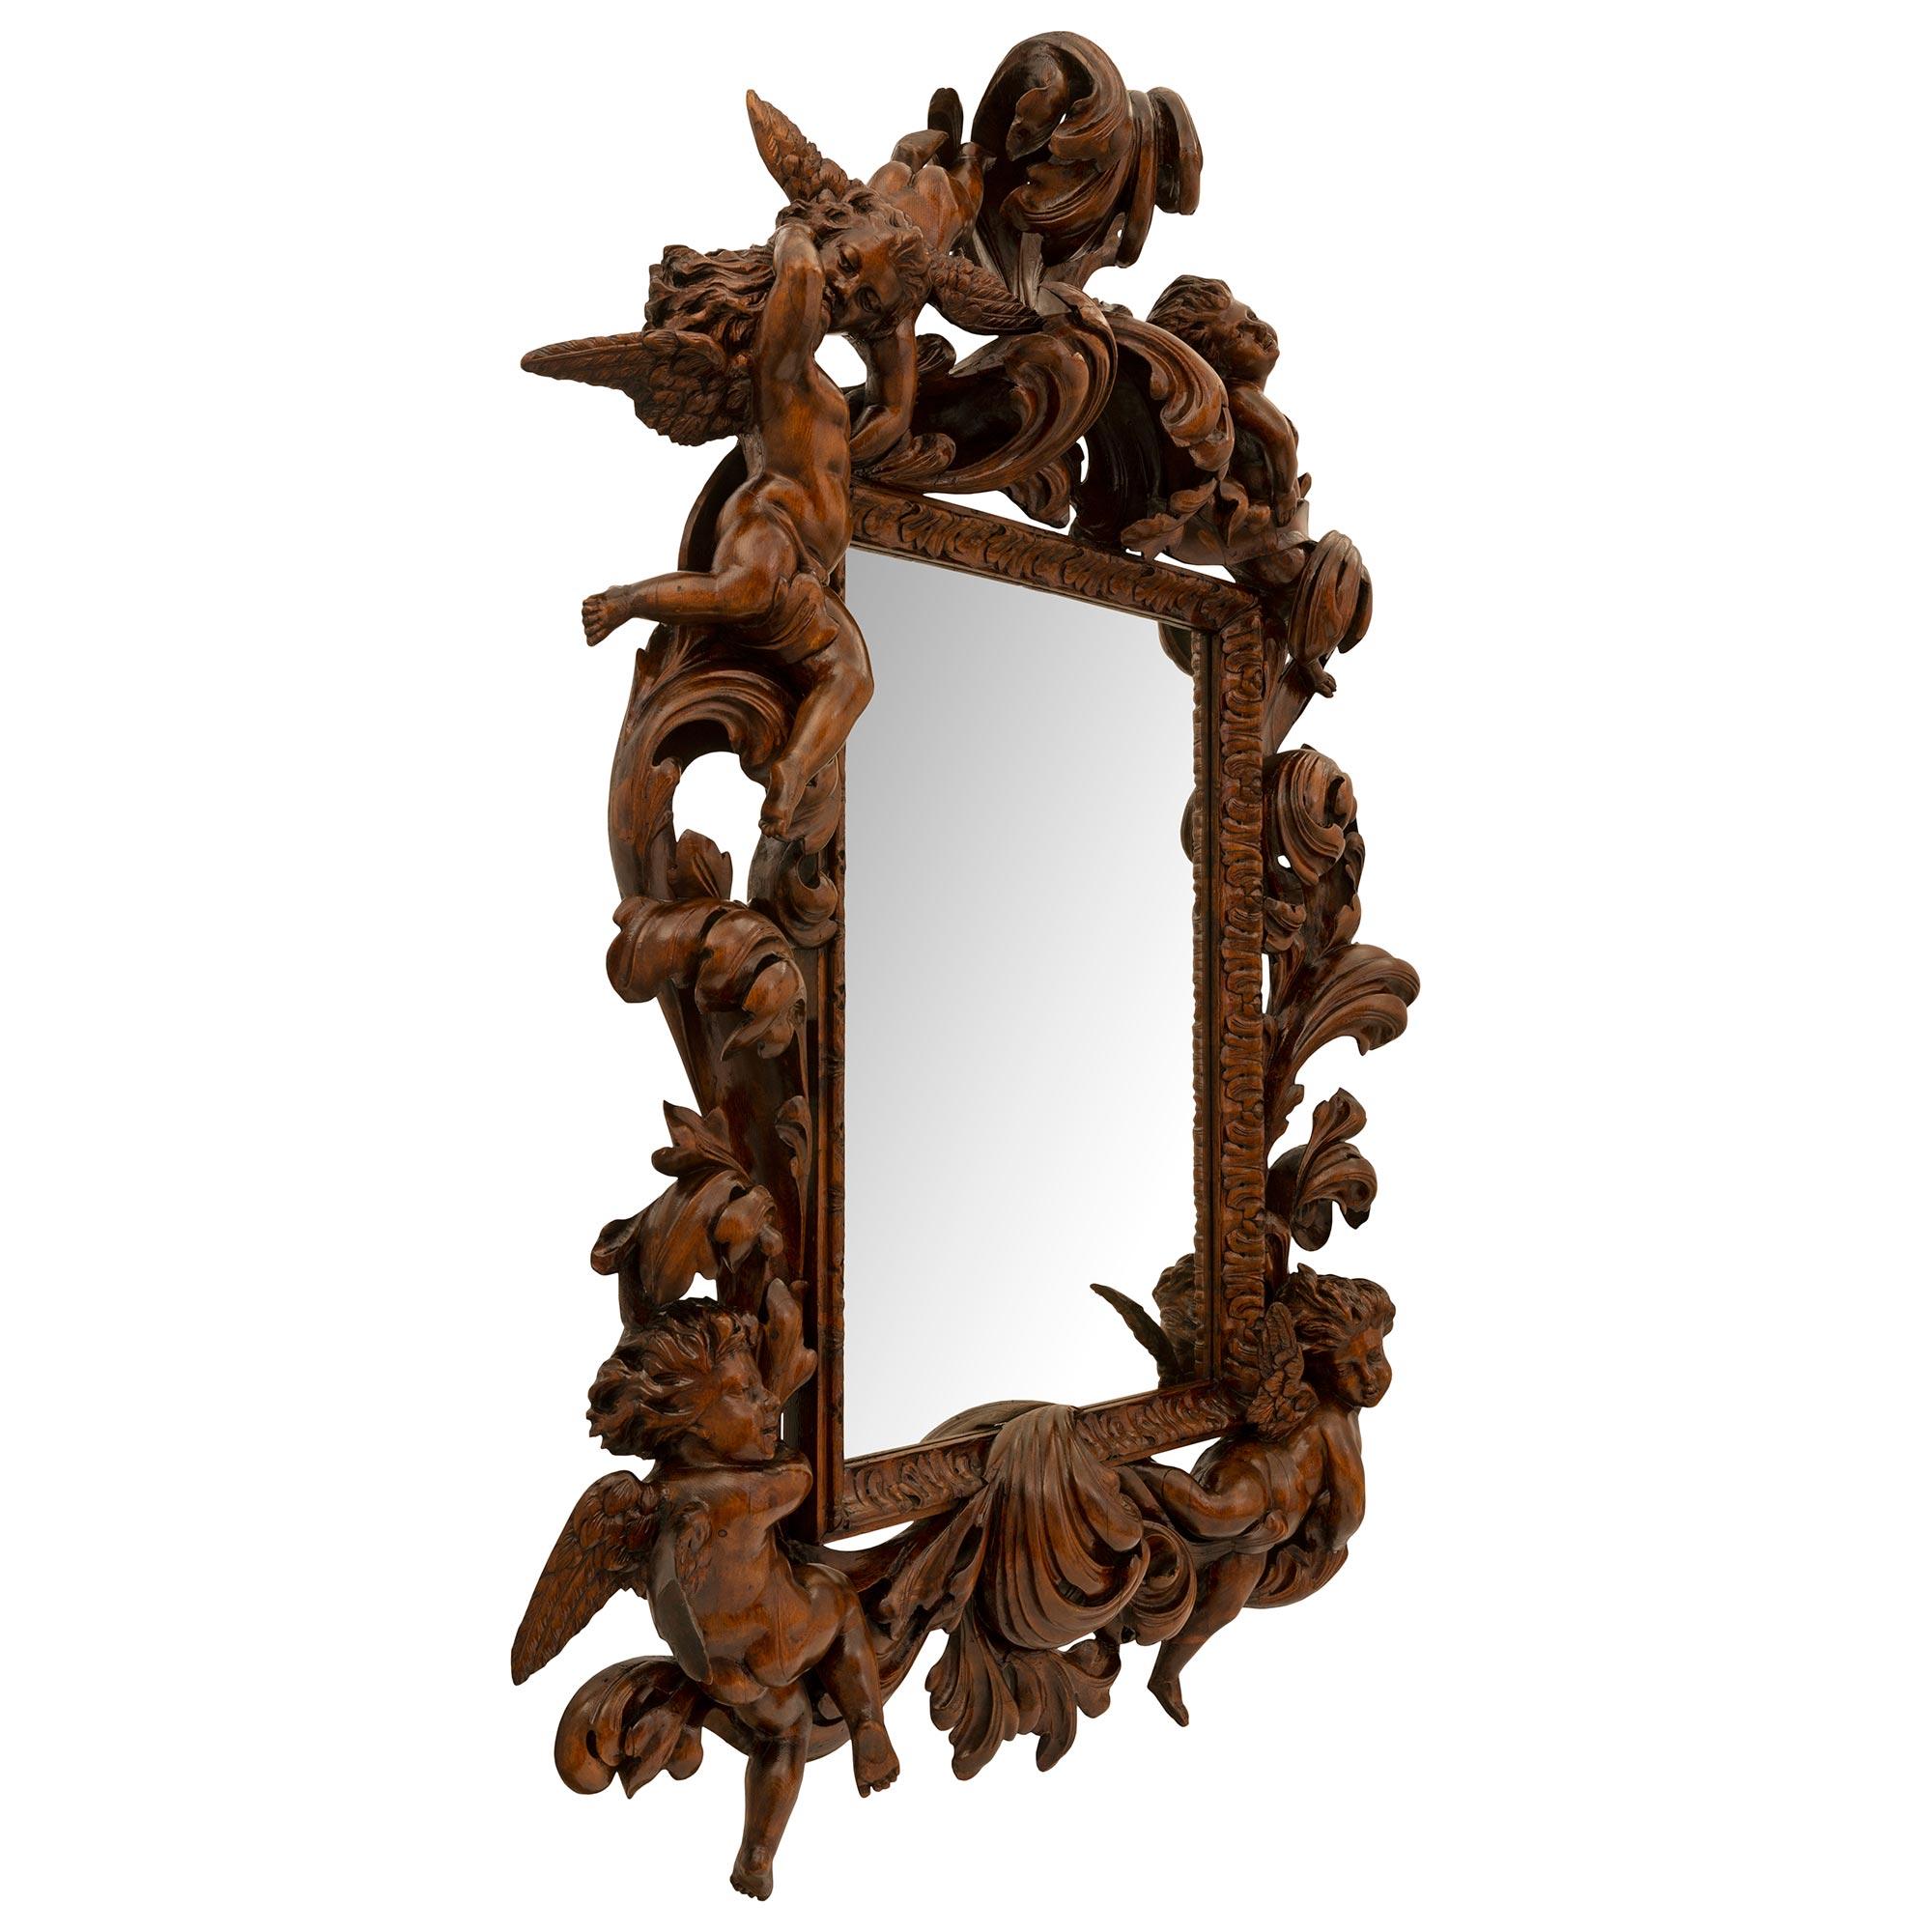 A stunning and most impressive Italian 19th century Baroque st. Walnut mirror. The mirror retains its original mirror plate framed within an elegant wrap around mottled foliate border. Exceptional and most decorative pierced scrolled large acanthus